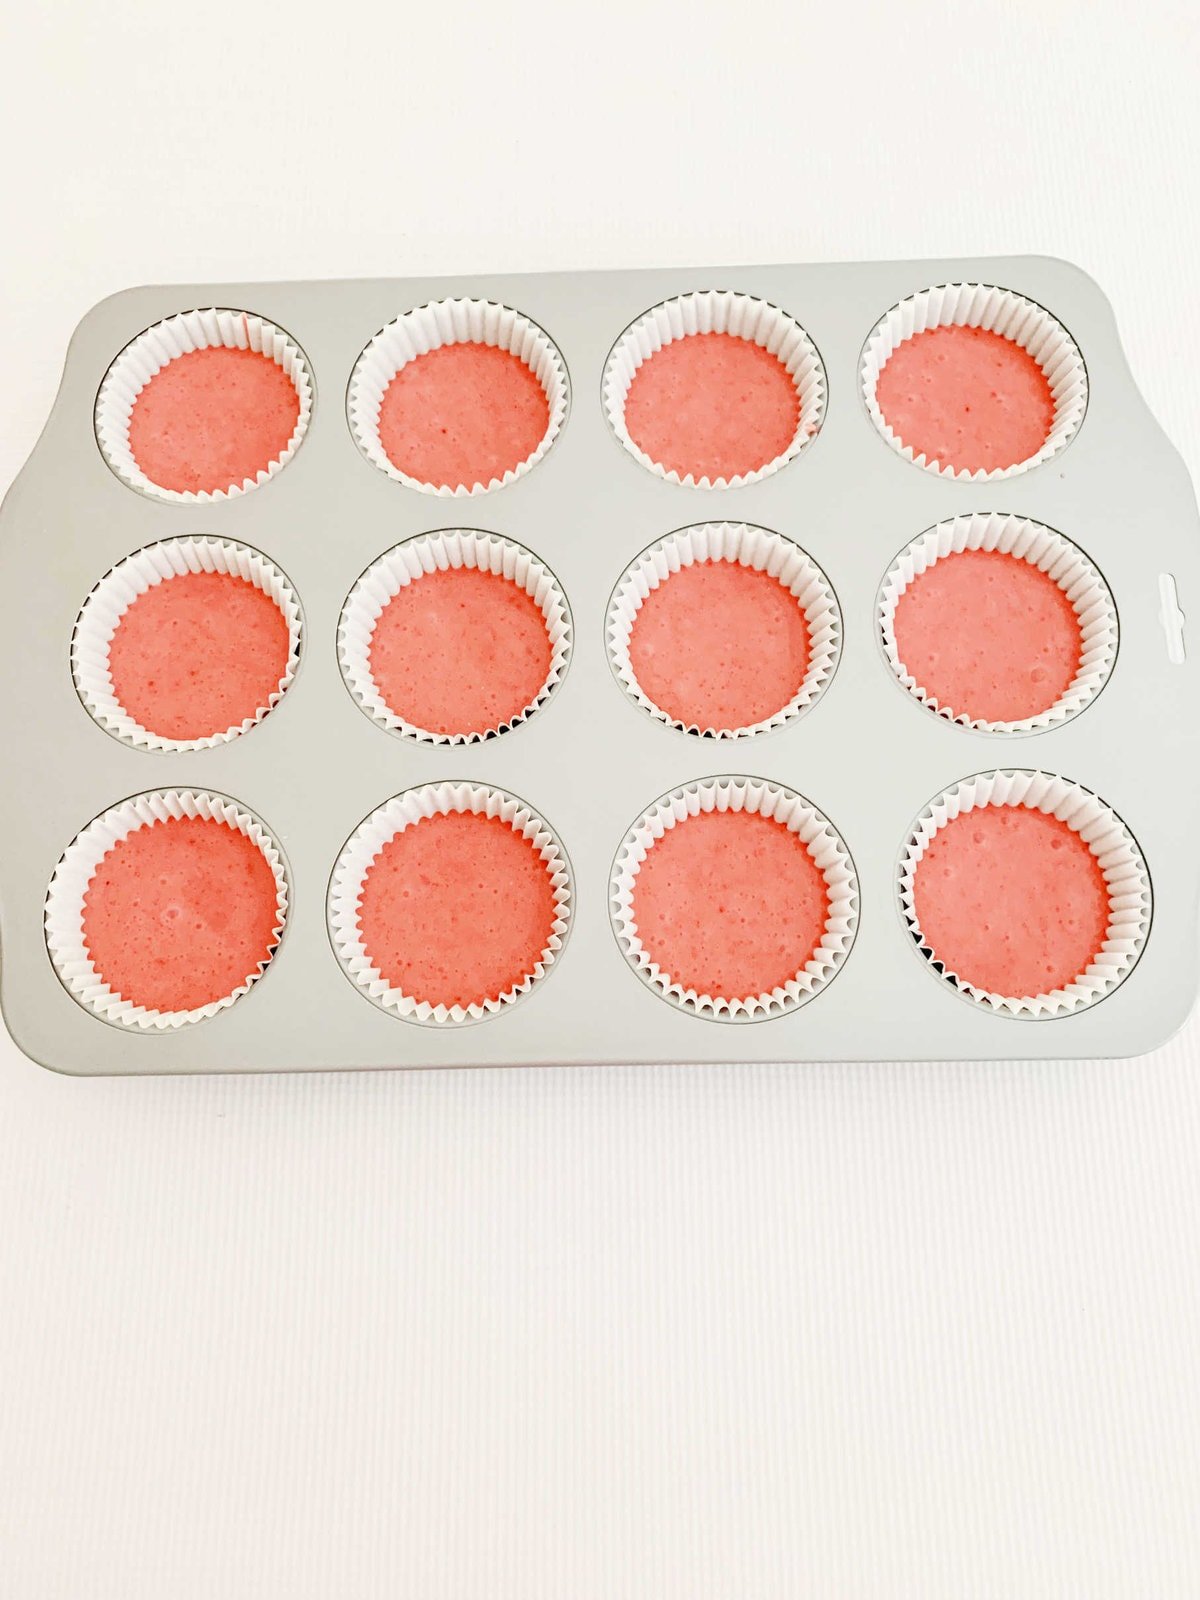 Cupcake liners filled with strawberry cupcake batter